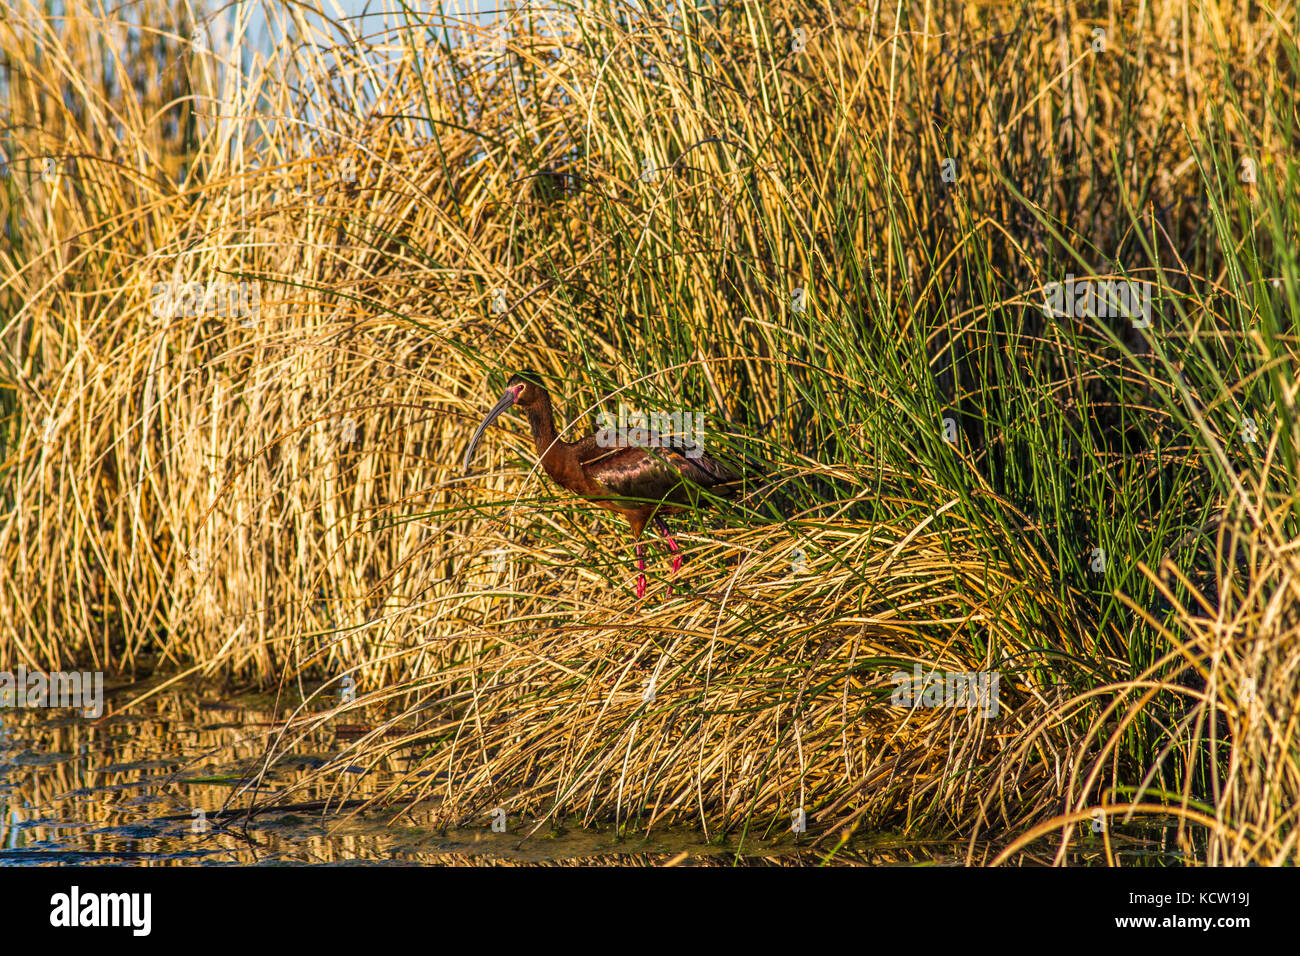 White-faced Ibis (Plegadis chihi) Bright, colorful bird, in the shoreline reeds its natural habitat, Frank Lake, AB, Canada Stock Photo